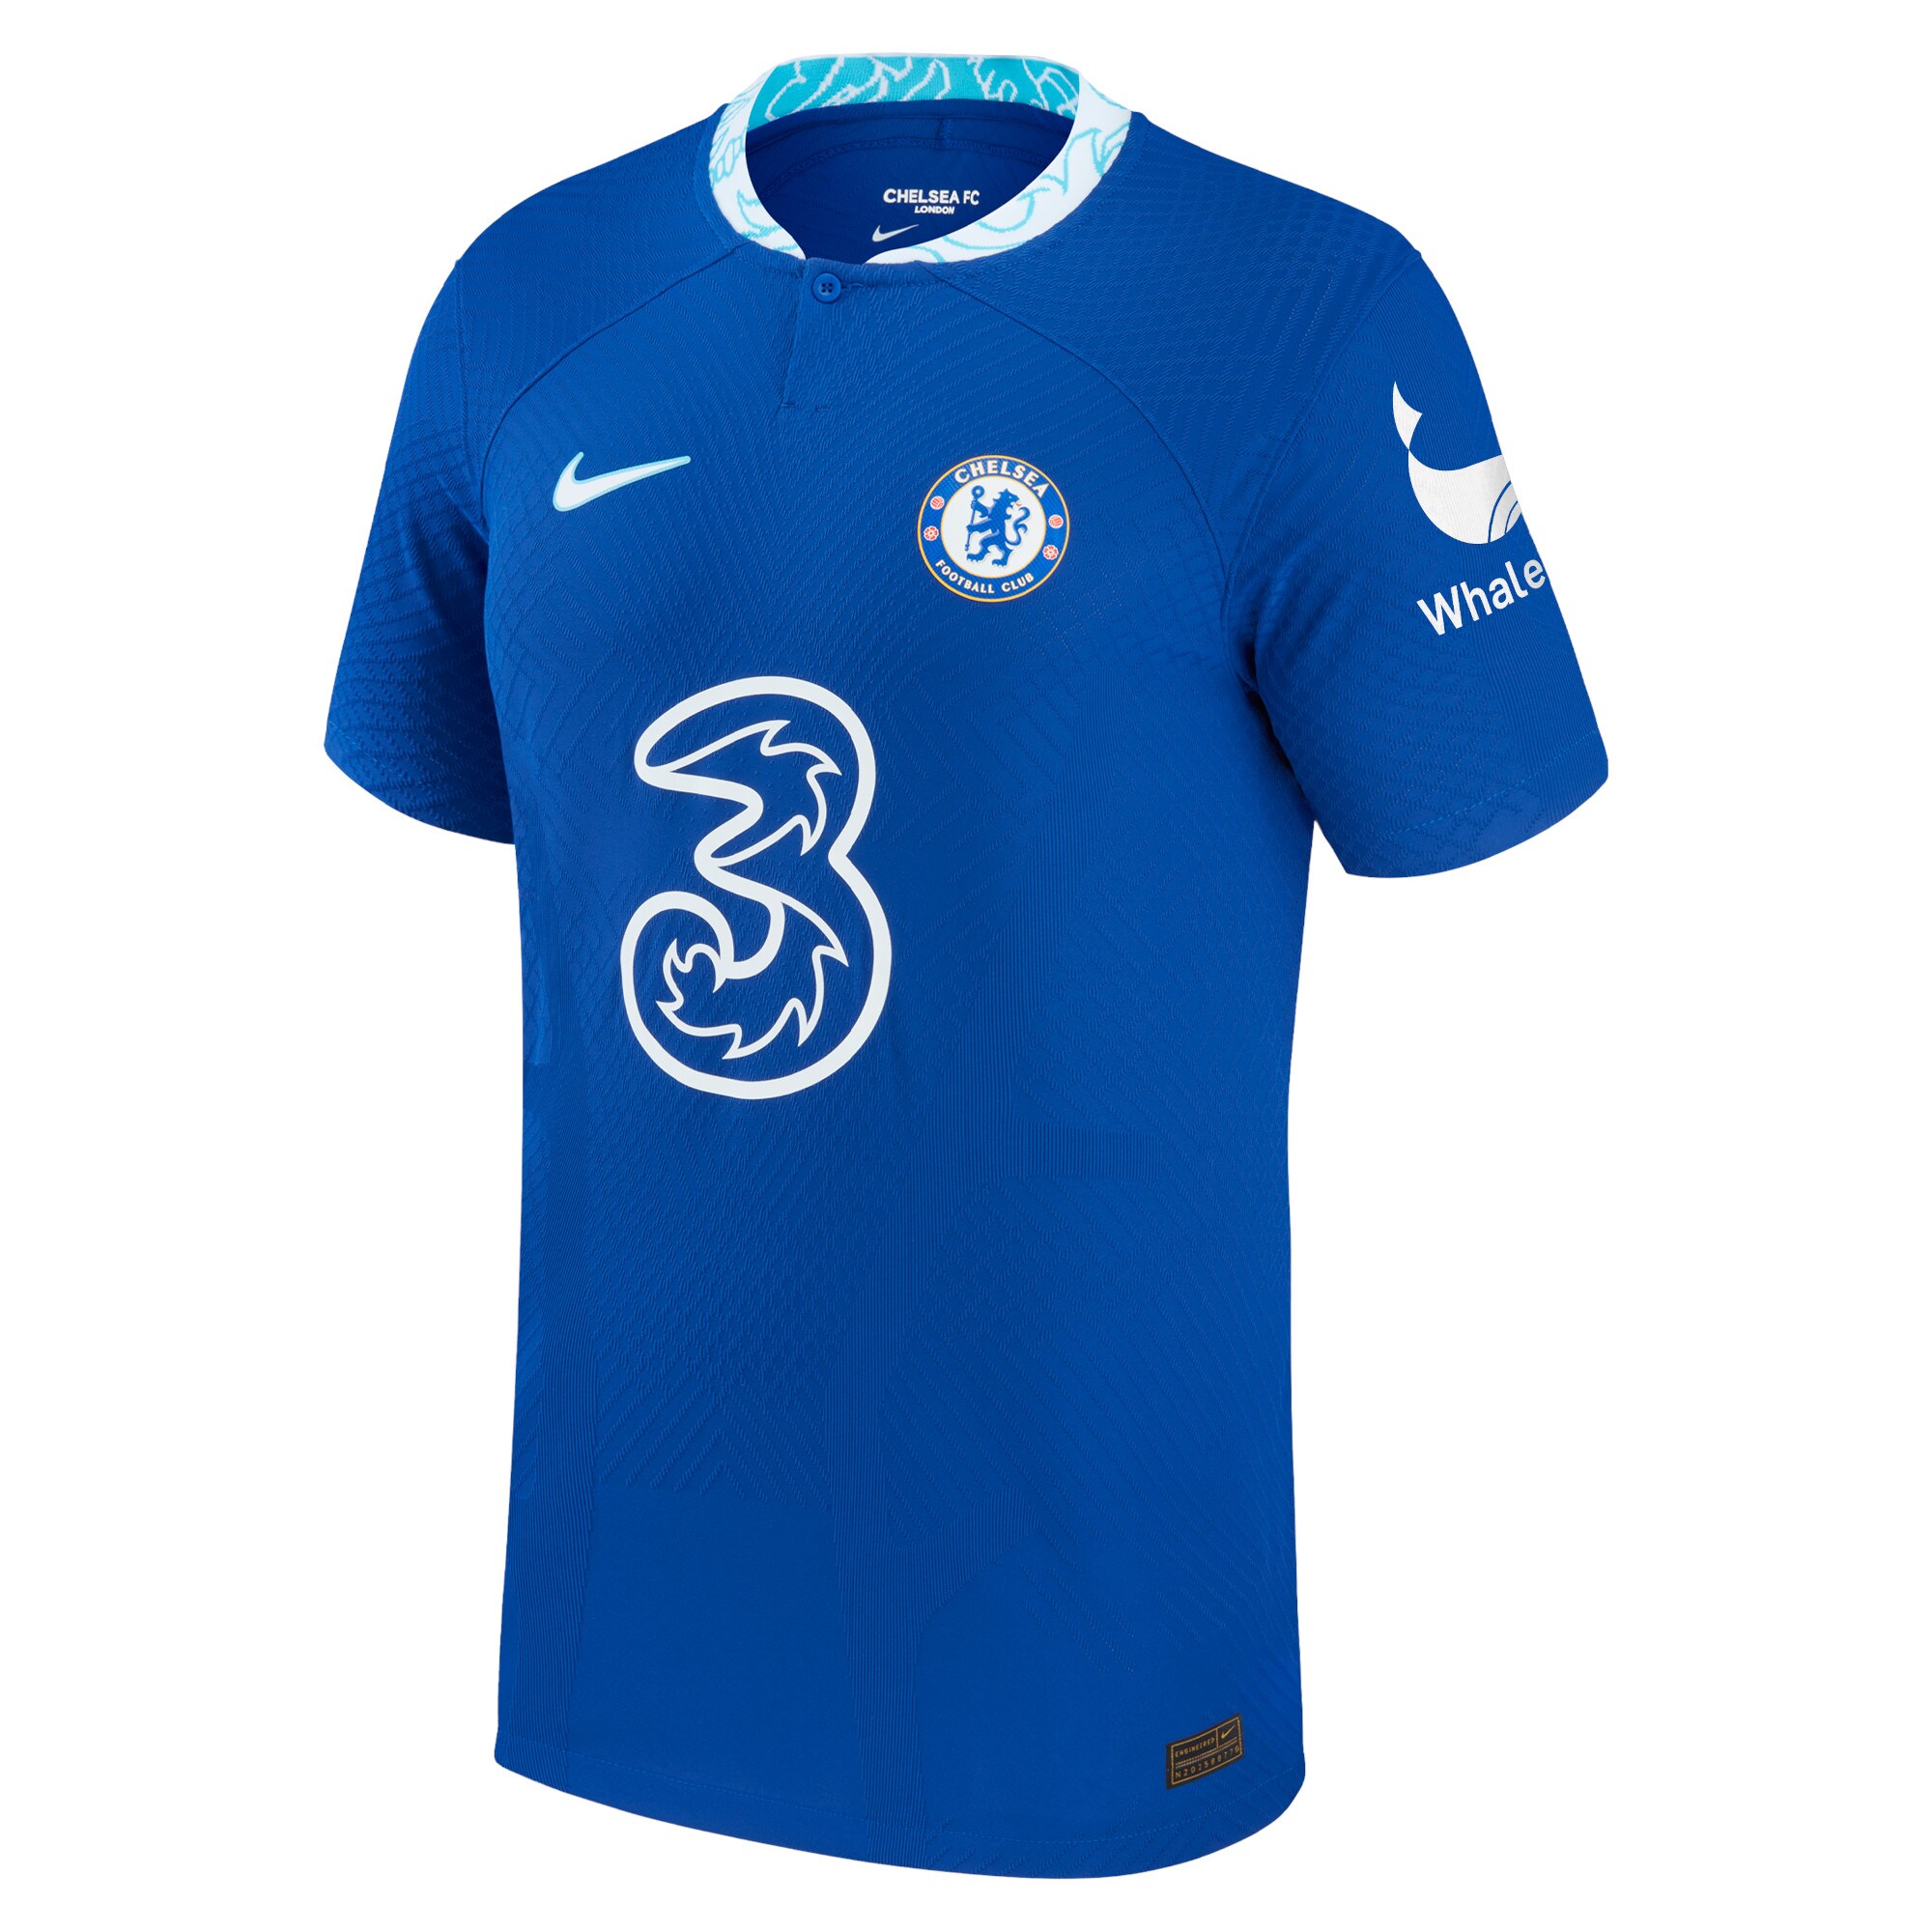 Chelsea Cup Home Vapor Match Shirt 2022-23 with Koulibaly 26 printing